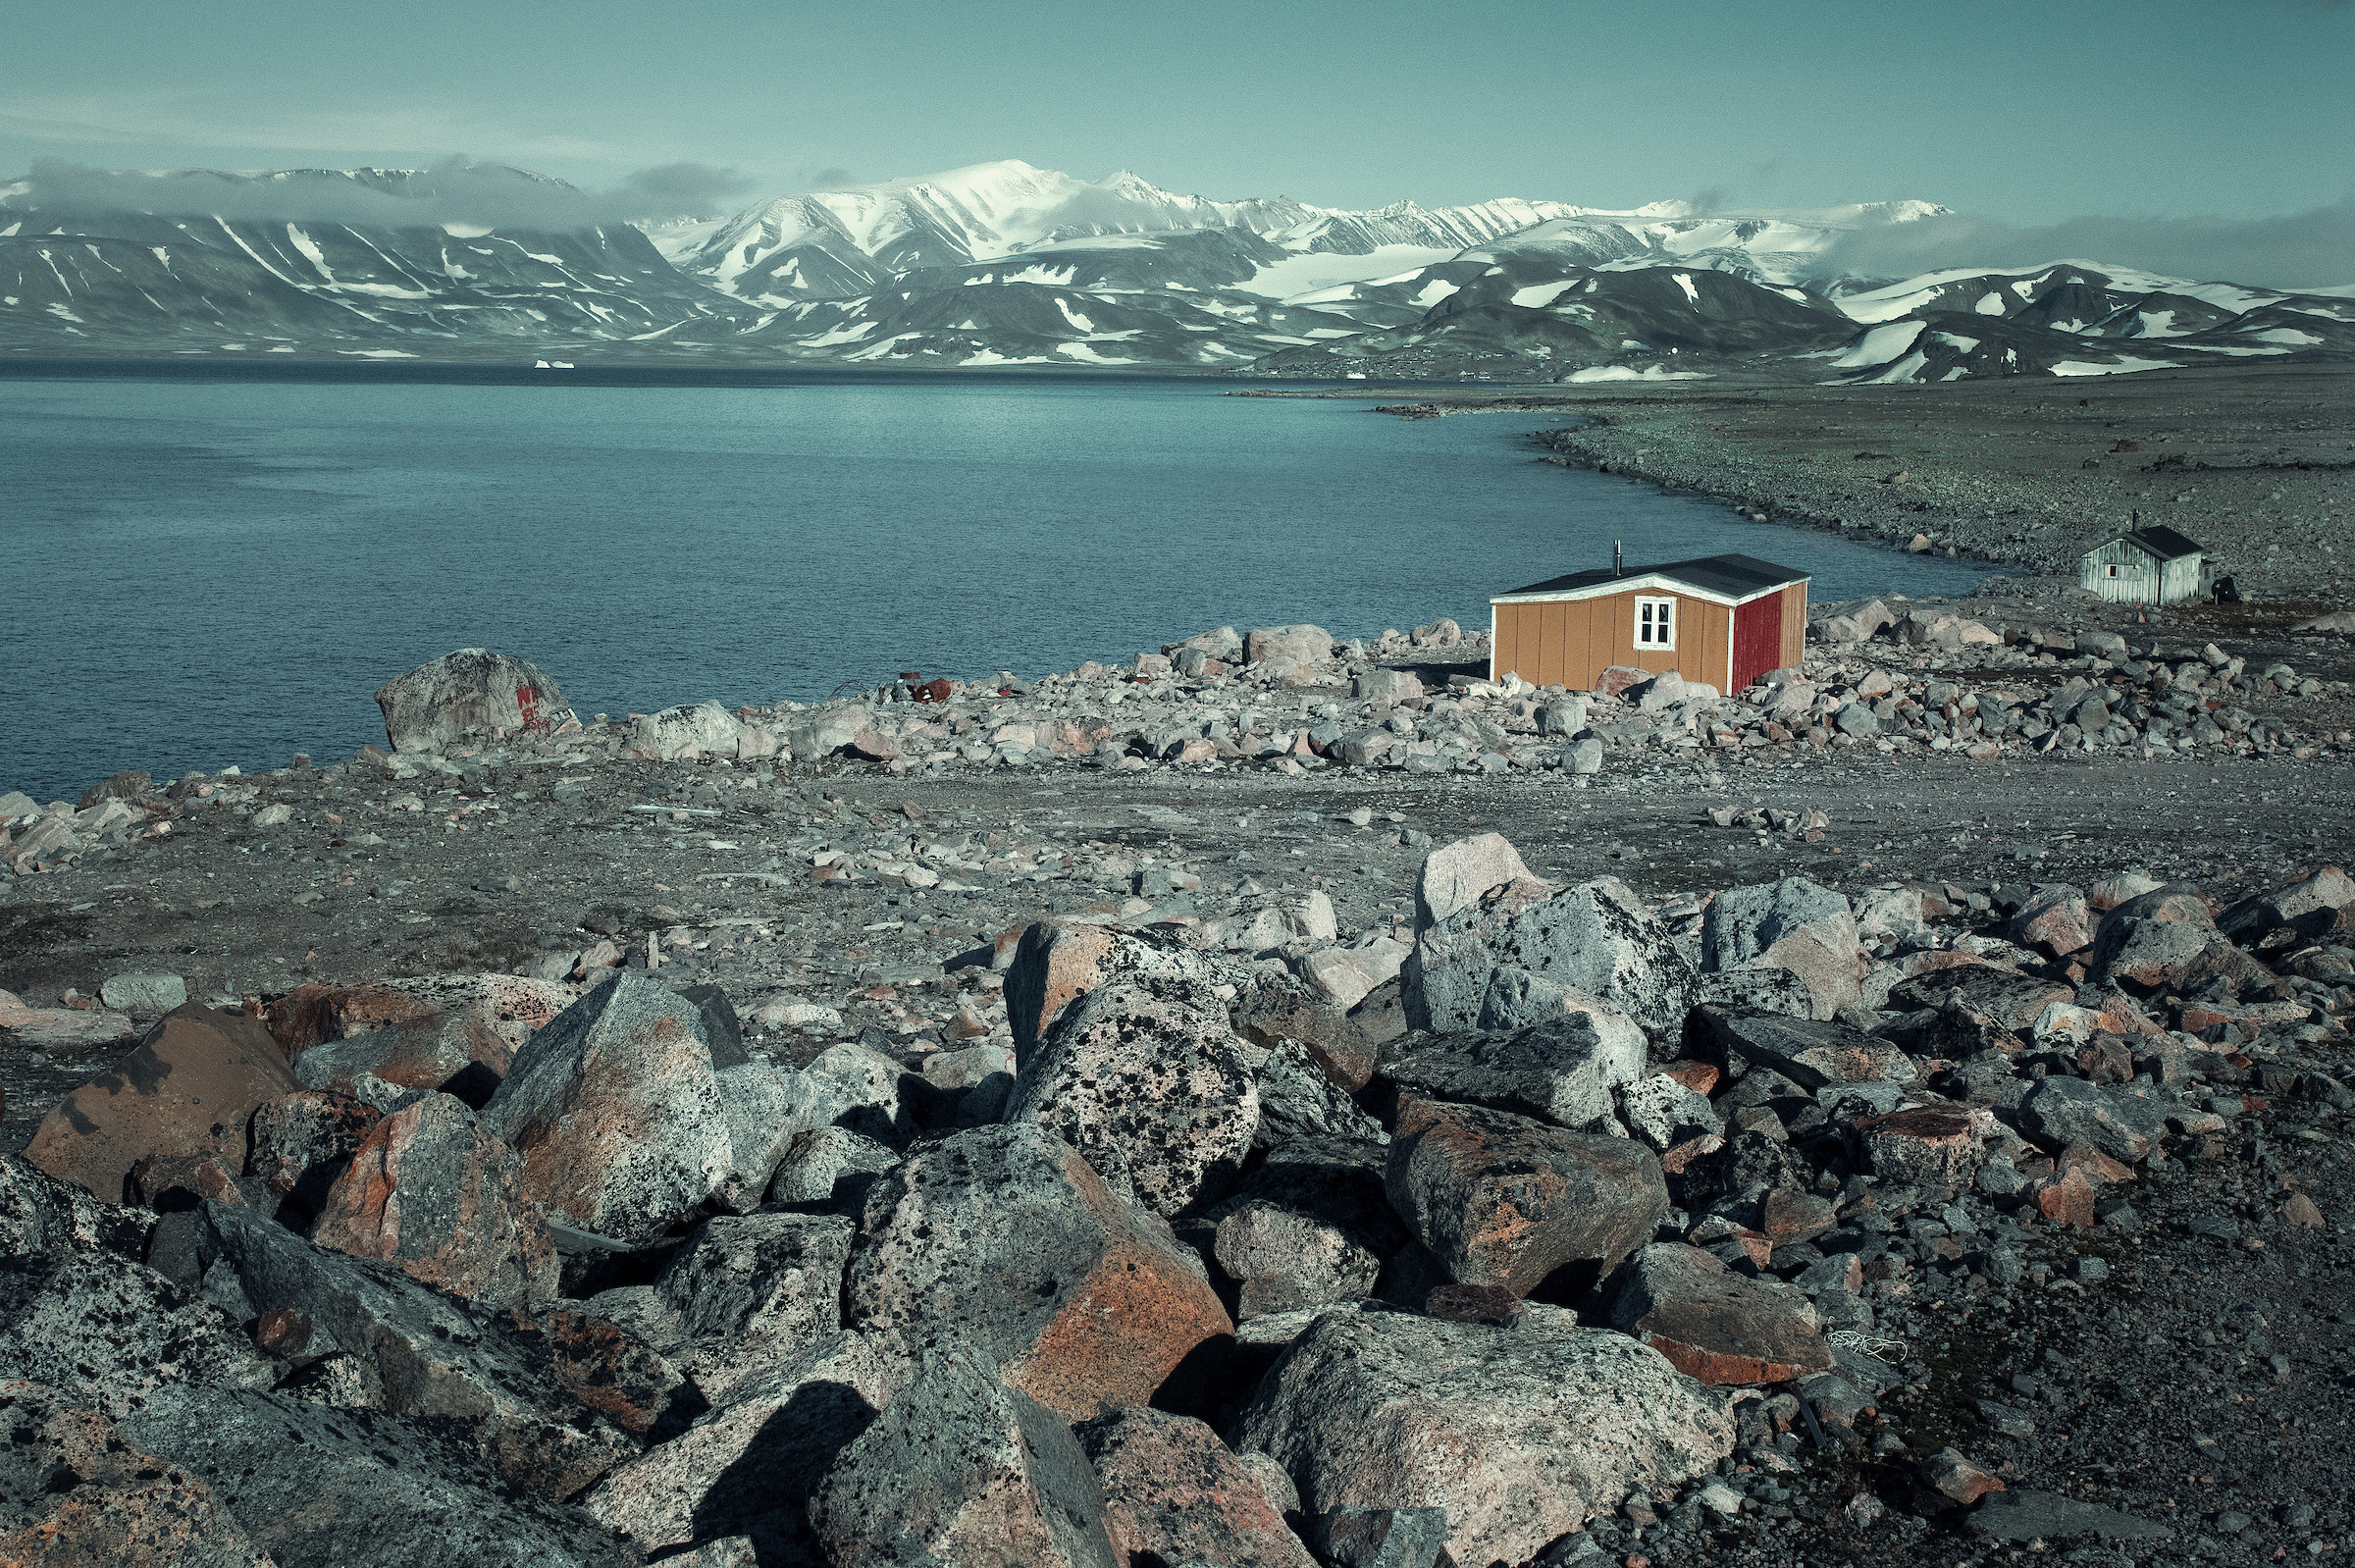 Houses on shore in Ittoqqortoormiit. Photo by Nicole Franken - Visit Greenland